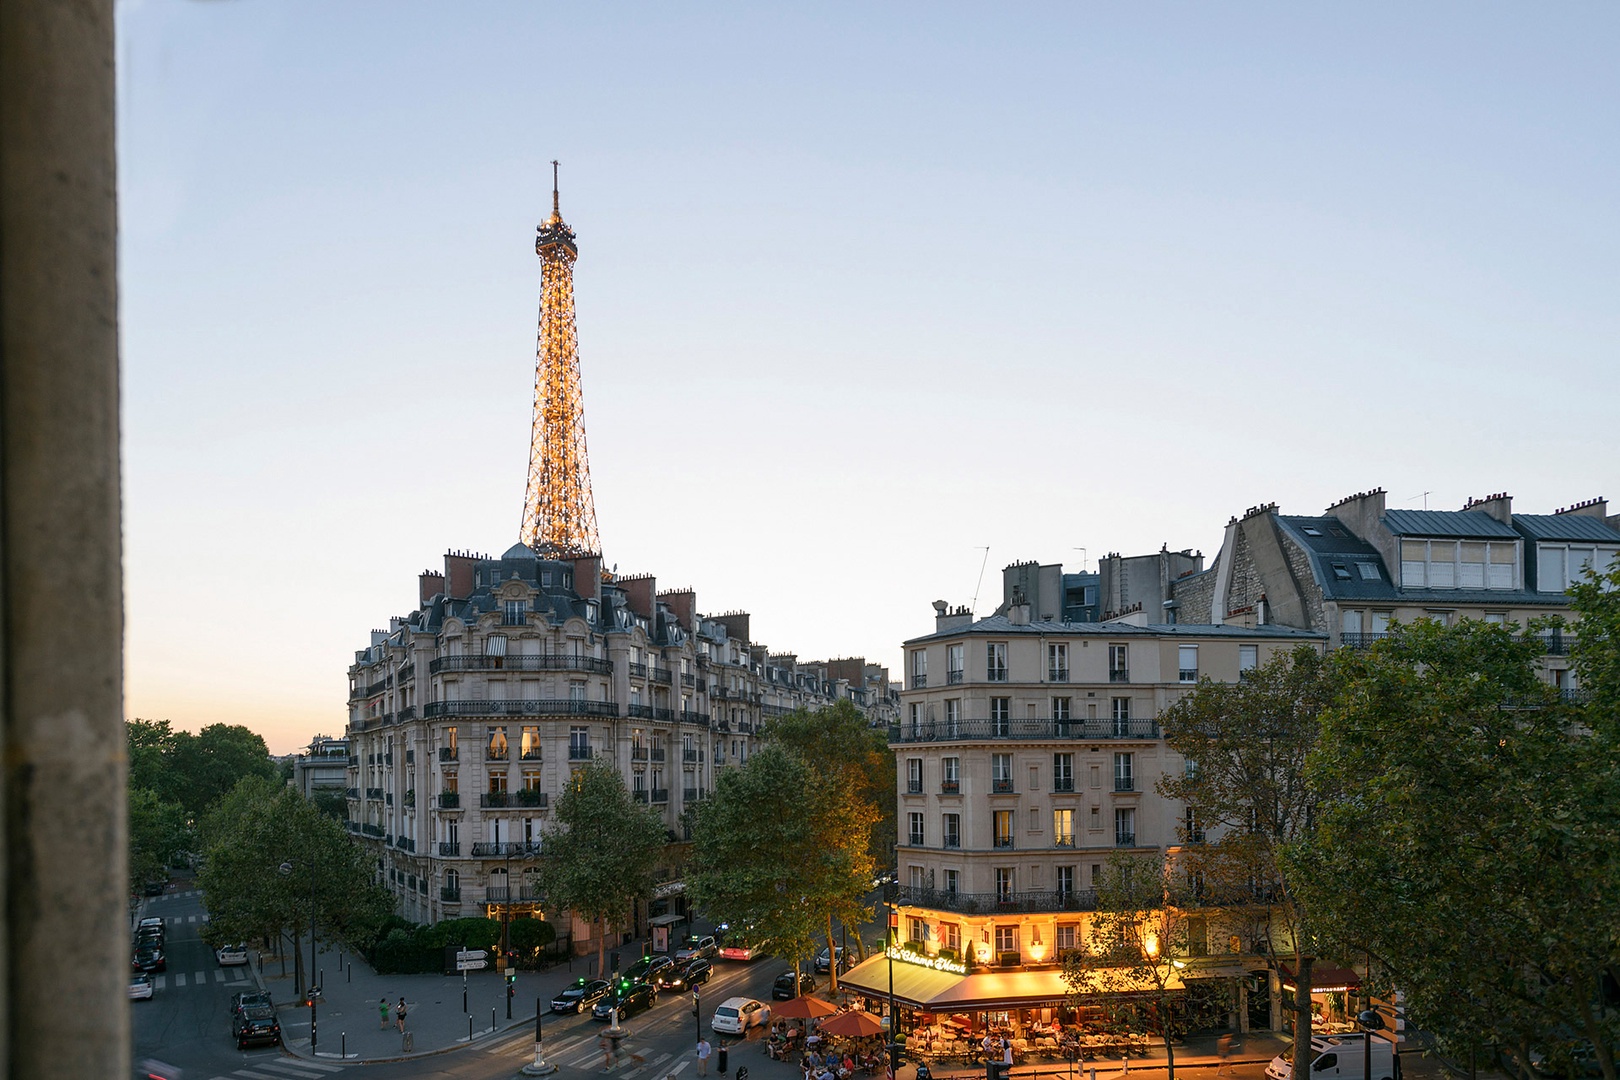 Watch the sunset and the Eiffel Tower light up at night!